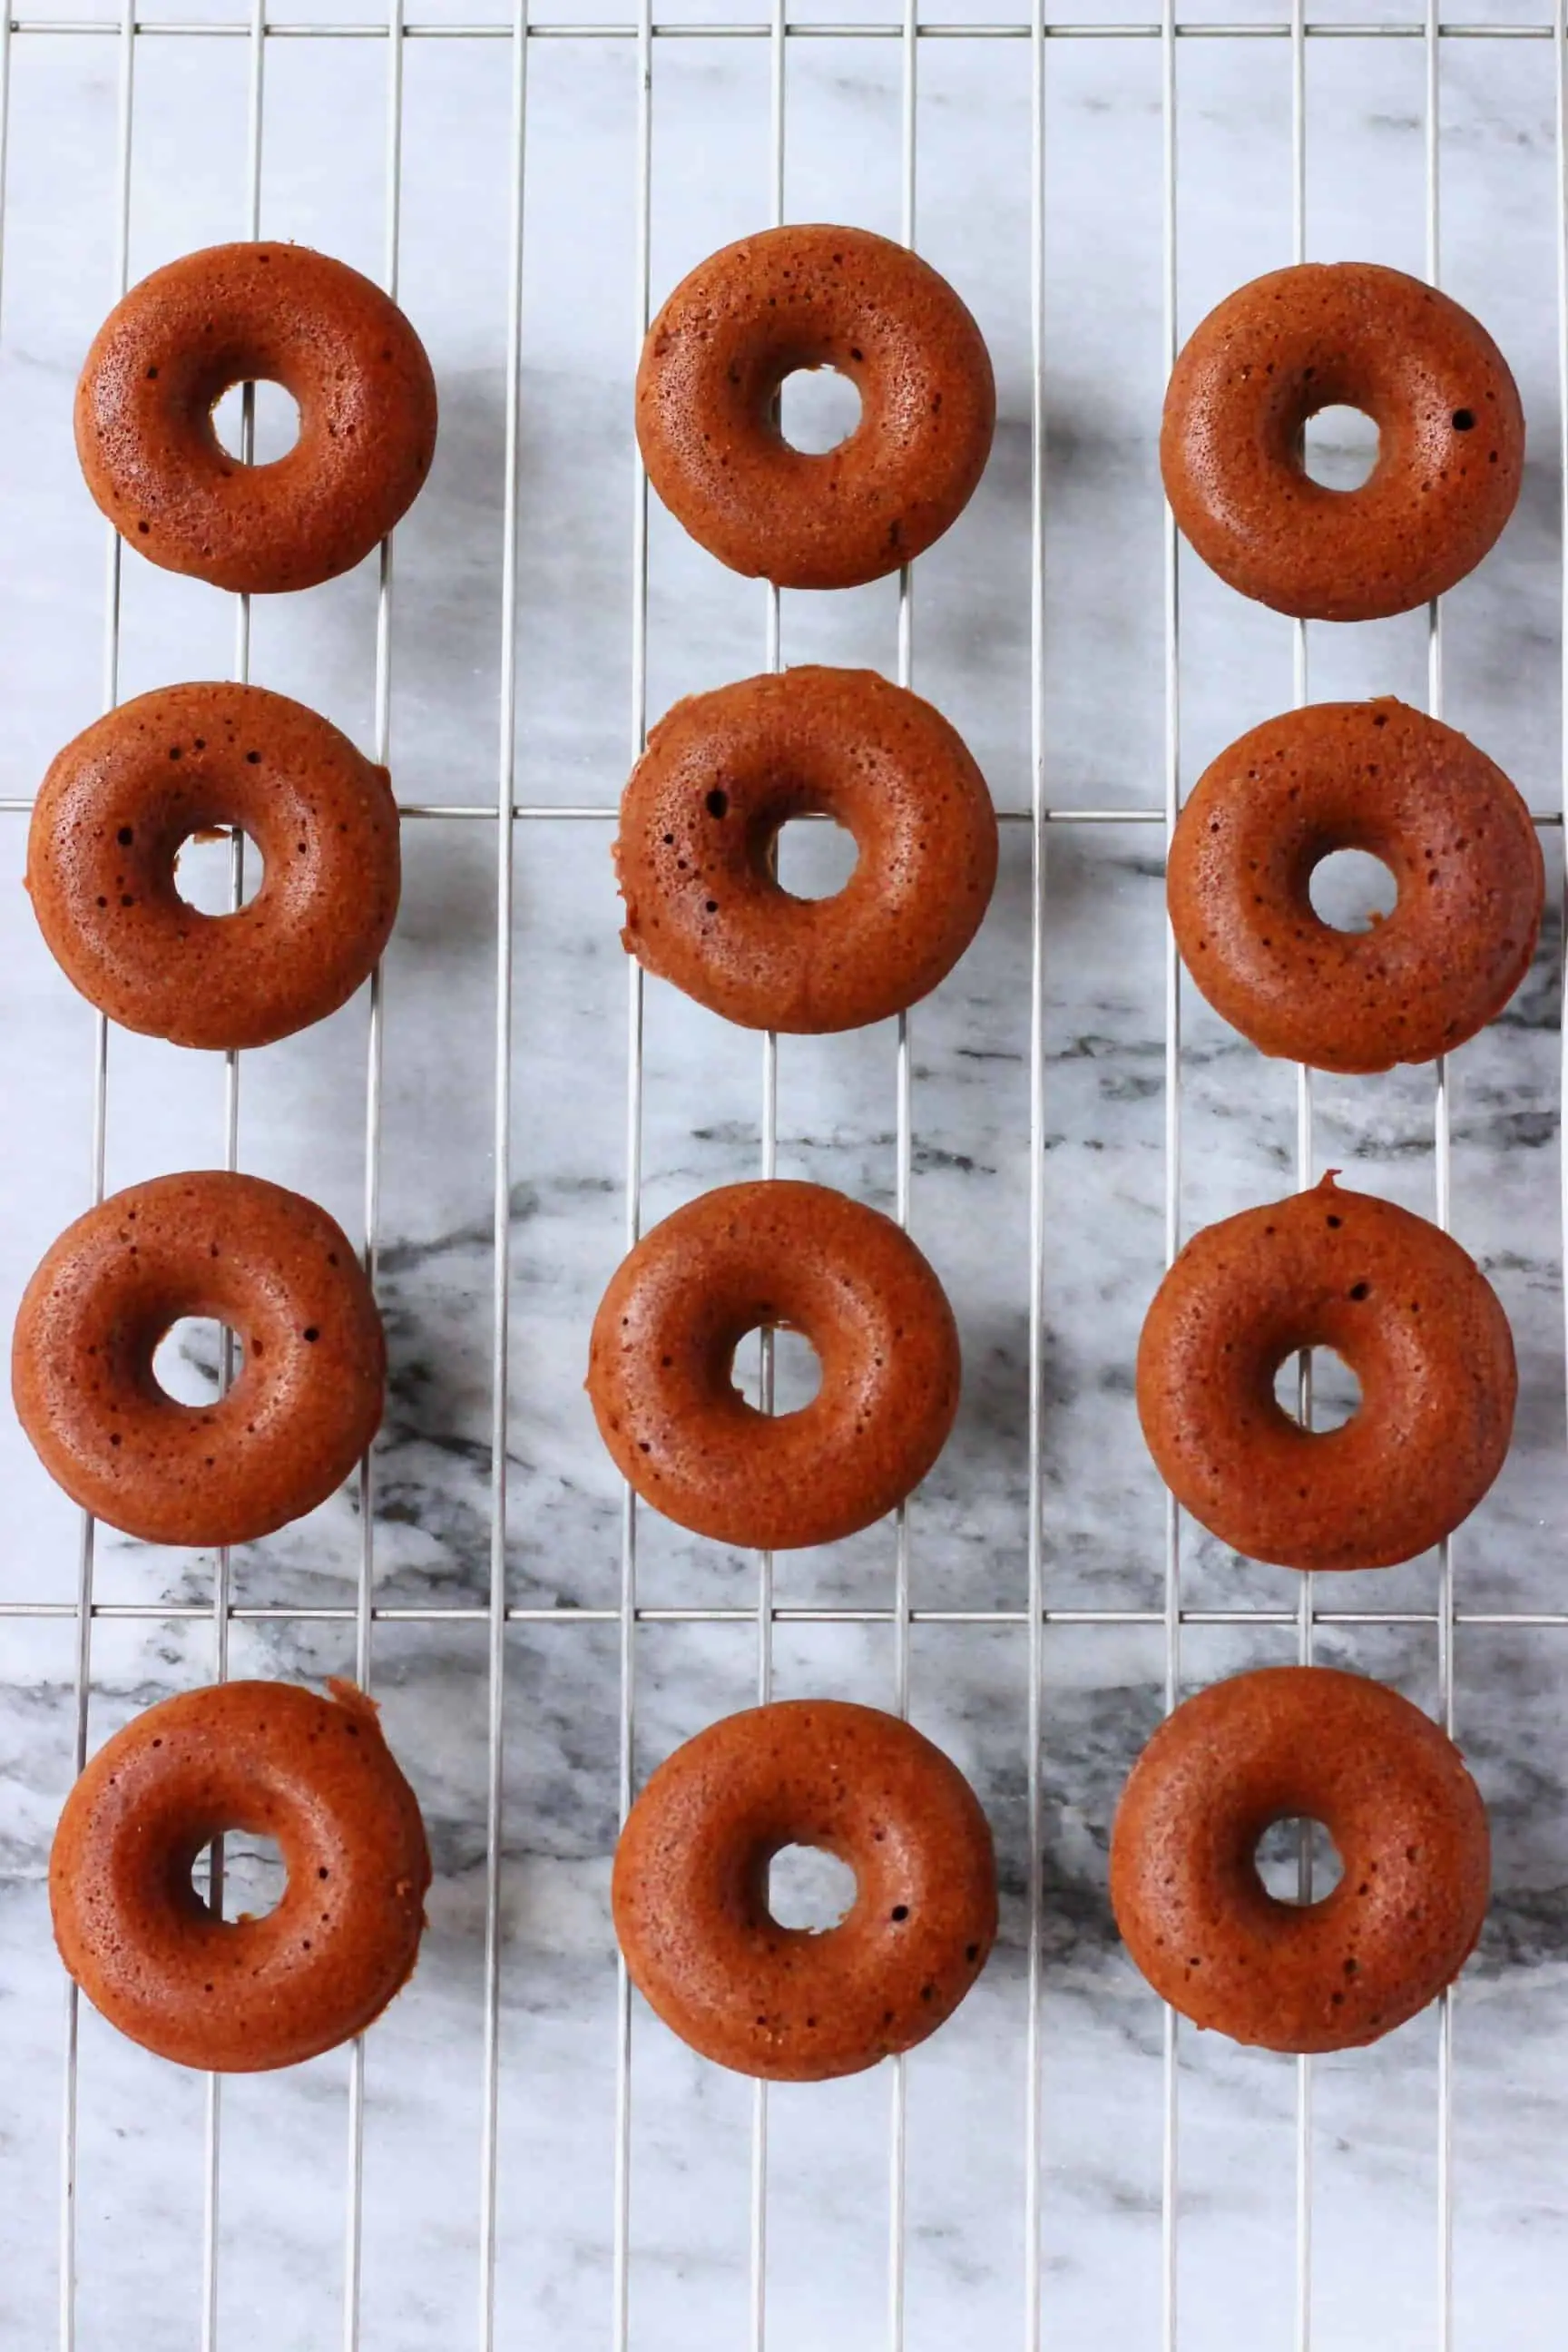 Chocolate mini donuts on a wire rack against a marble background